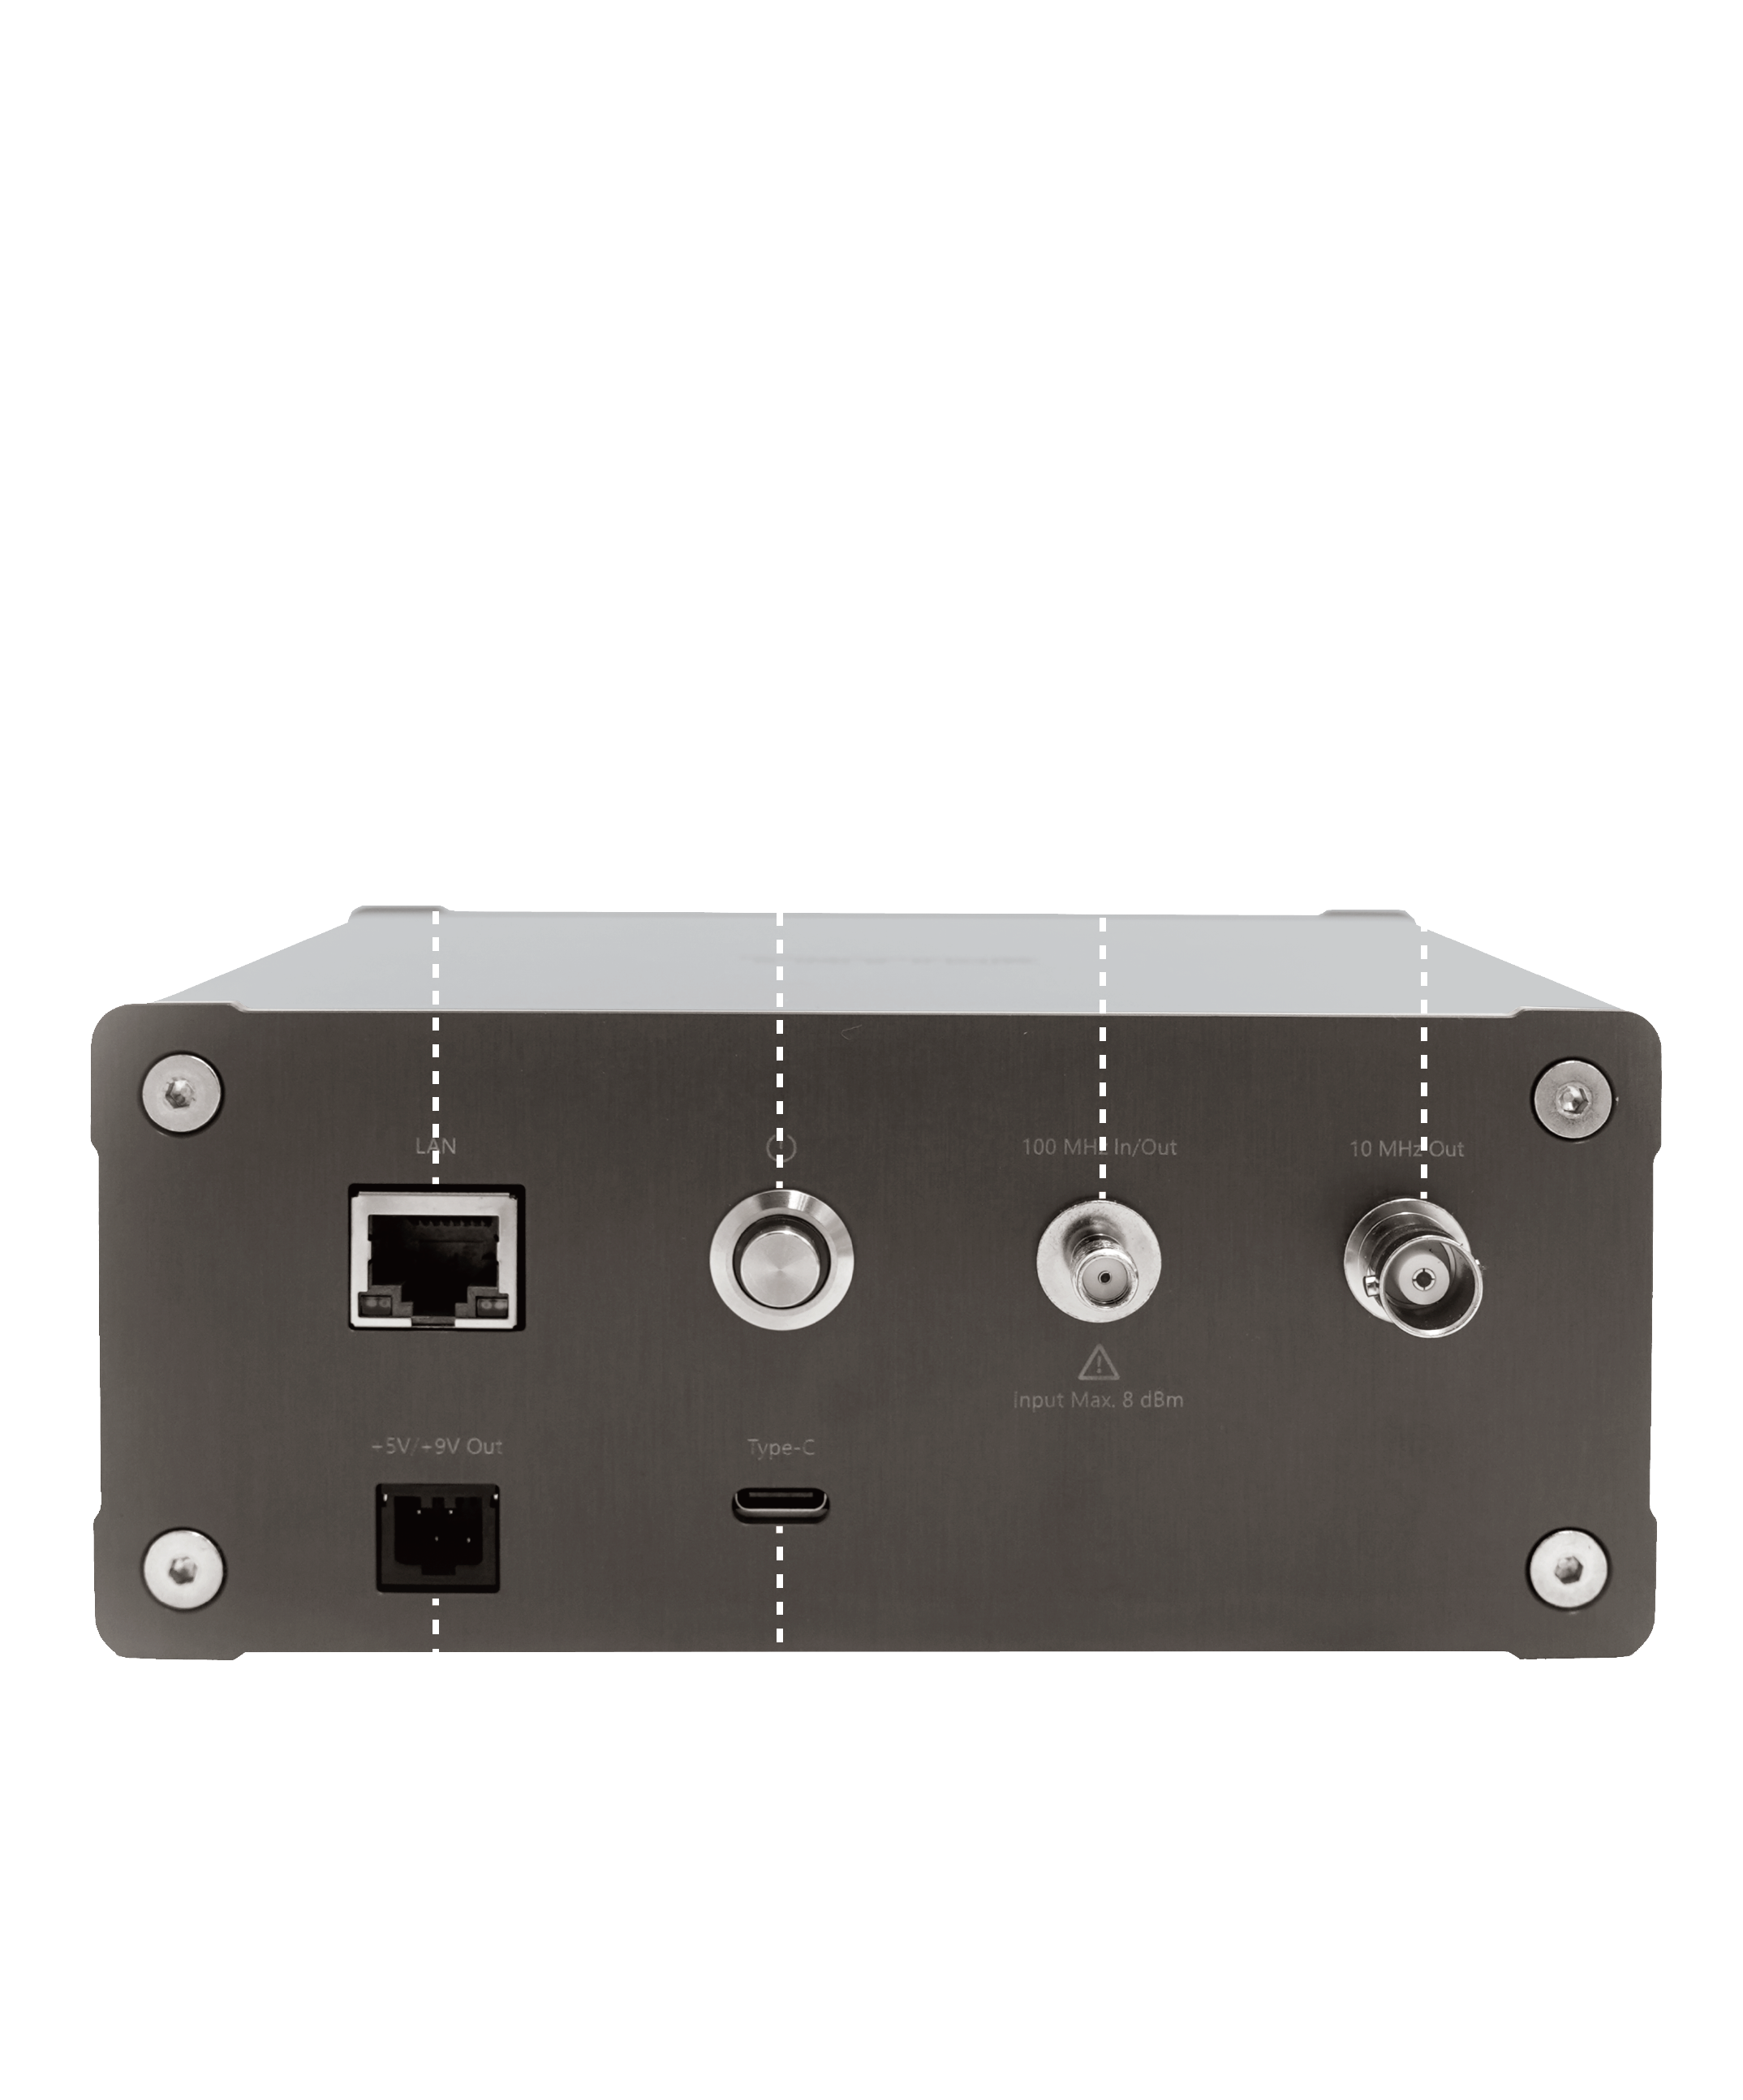 Back of UD Box with a LAN port, a power button, a DC IN port, a 100 MHz in/out port, a 10 MHz outport, and a +5V/+9V out port.